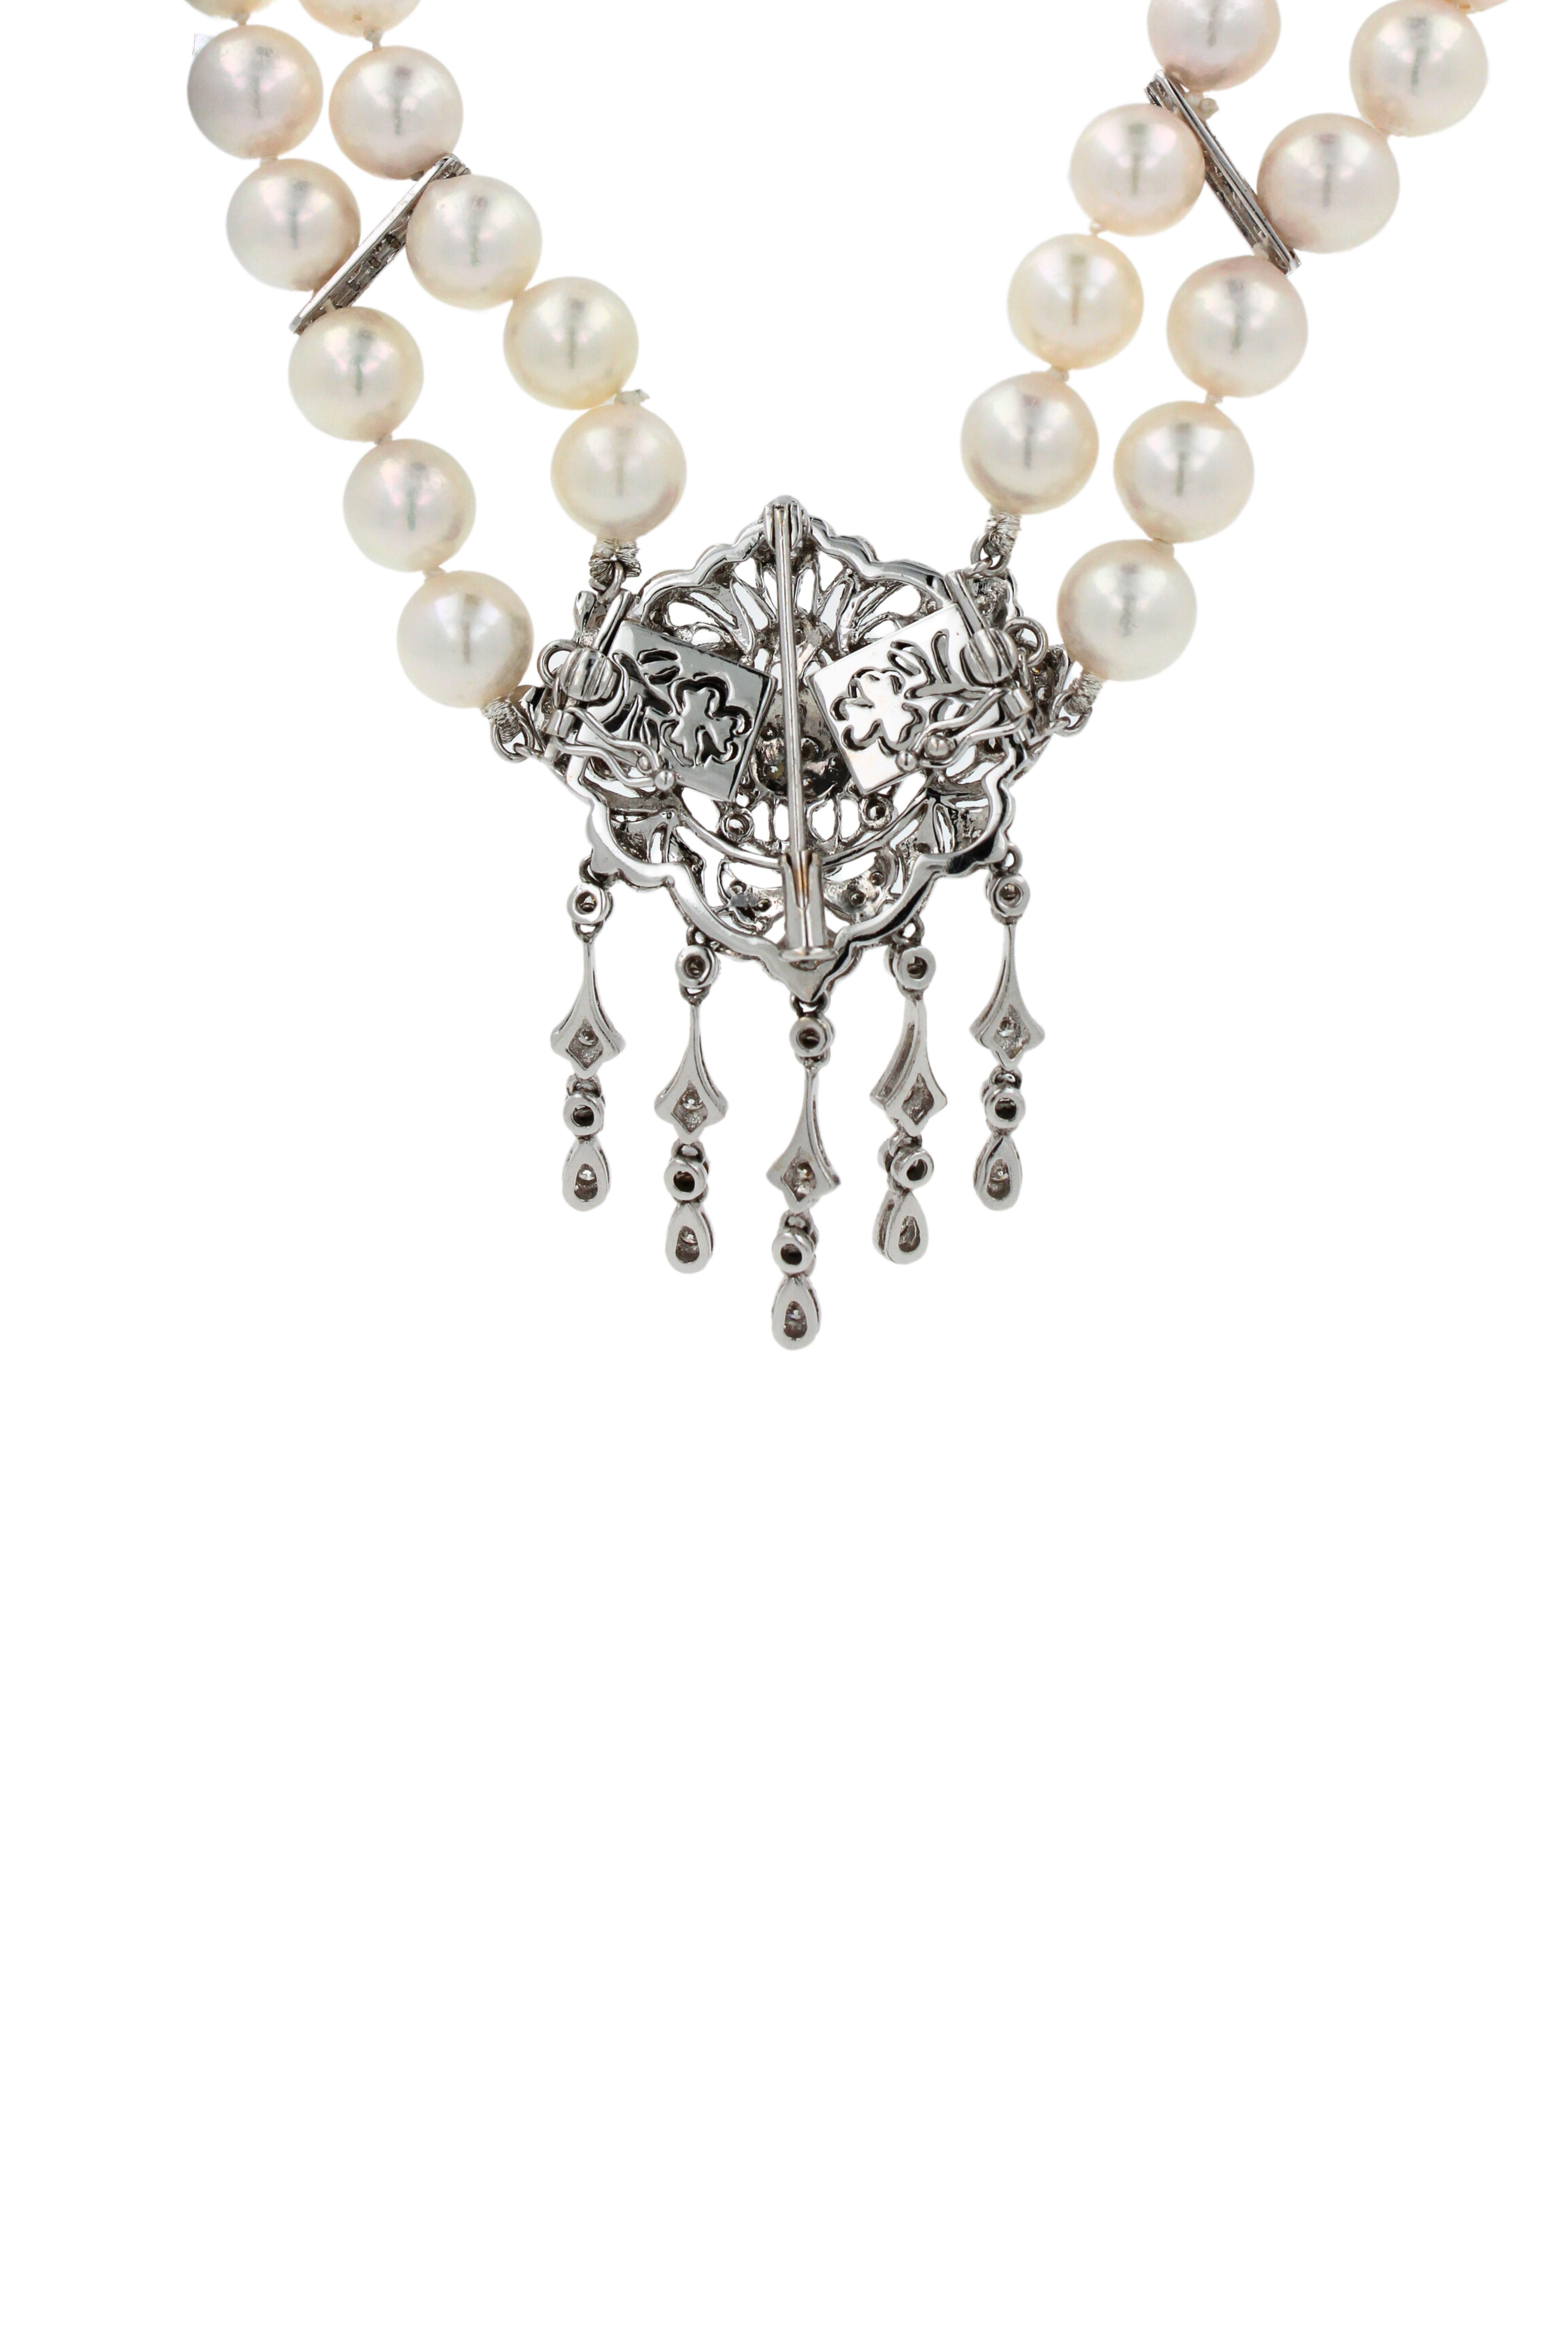 Art Deco Akoya Pearl Necklace/Brooch set in Diamonds & 18K White Gold  For Sale 7